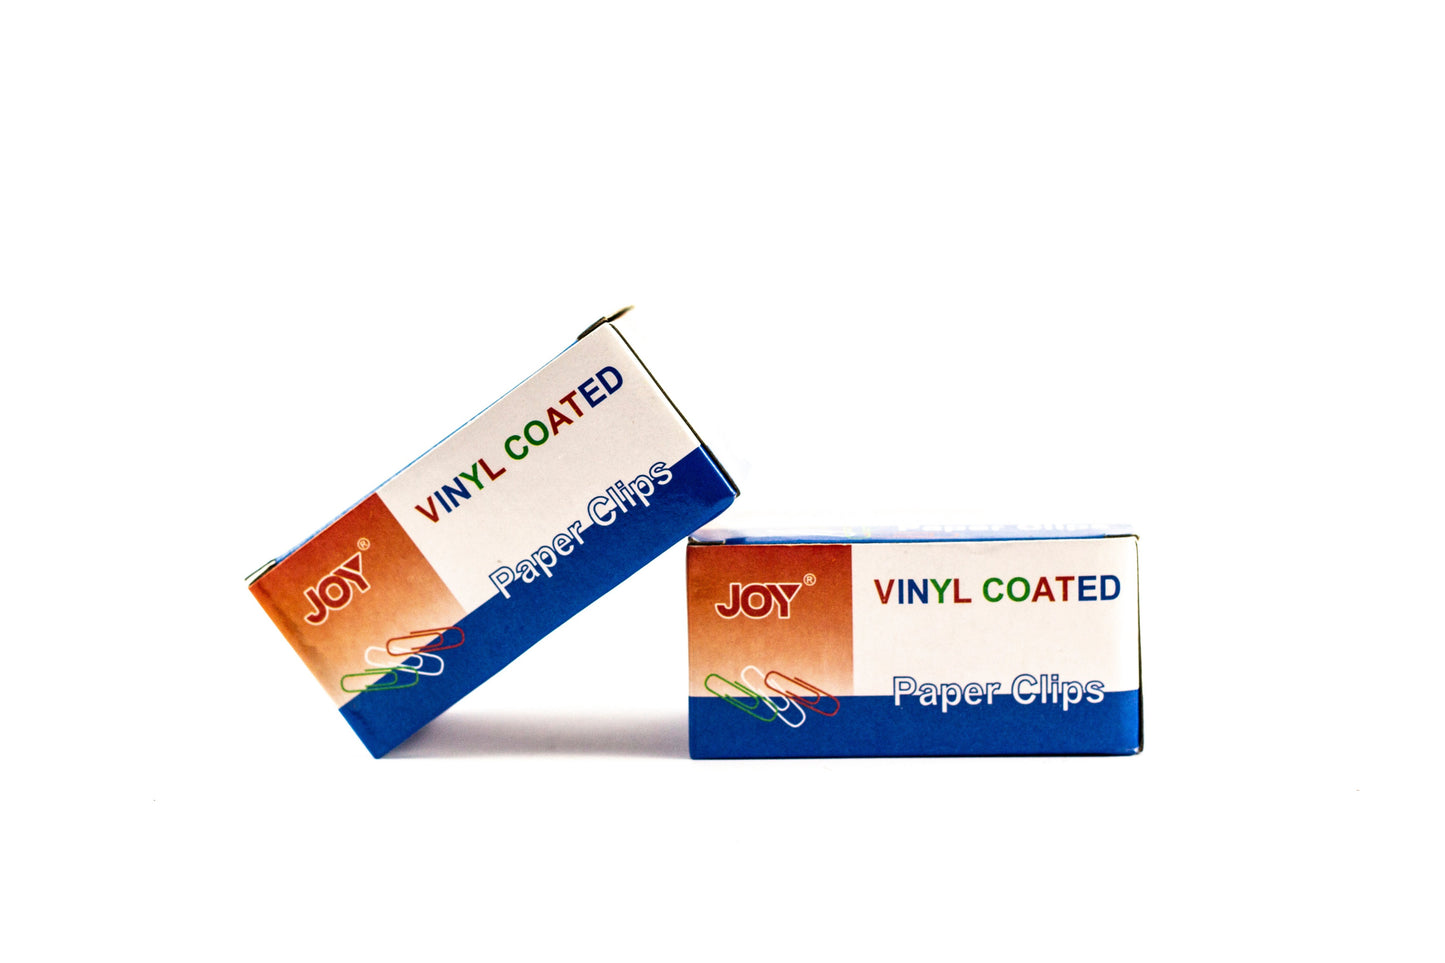 Joy Paper Clips Vinyl Coated 100pcs/pack | Sold by 10s